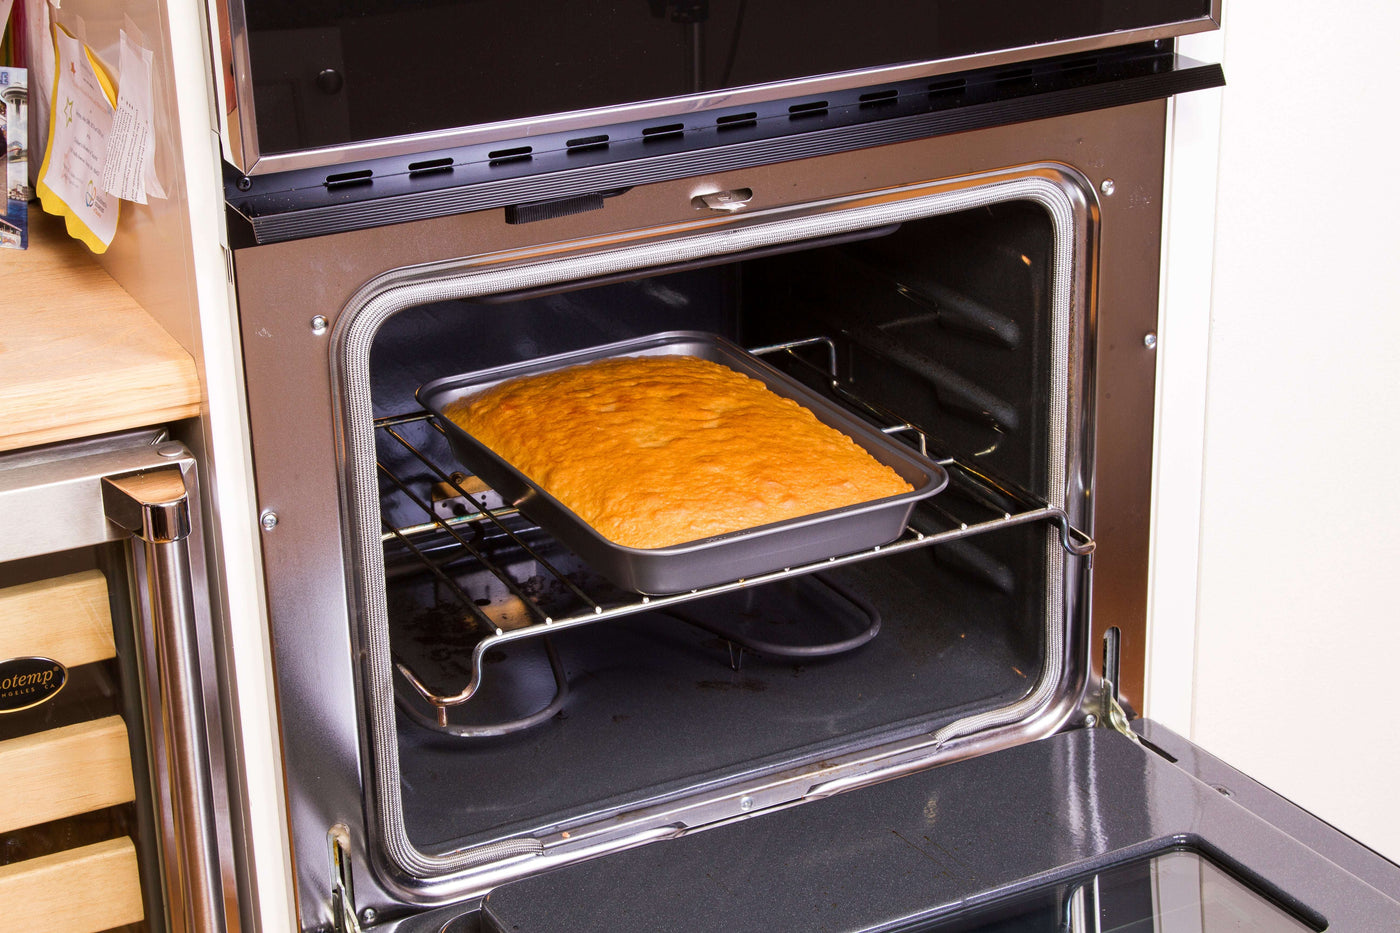 Baking Cake in a Convection Oven - Everything You Should Know - Foods Guy